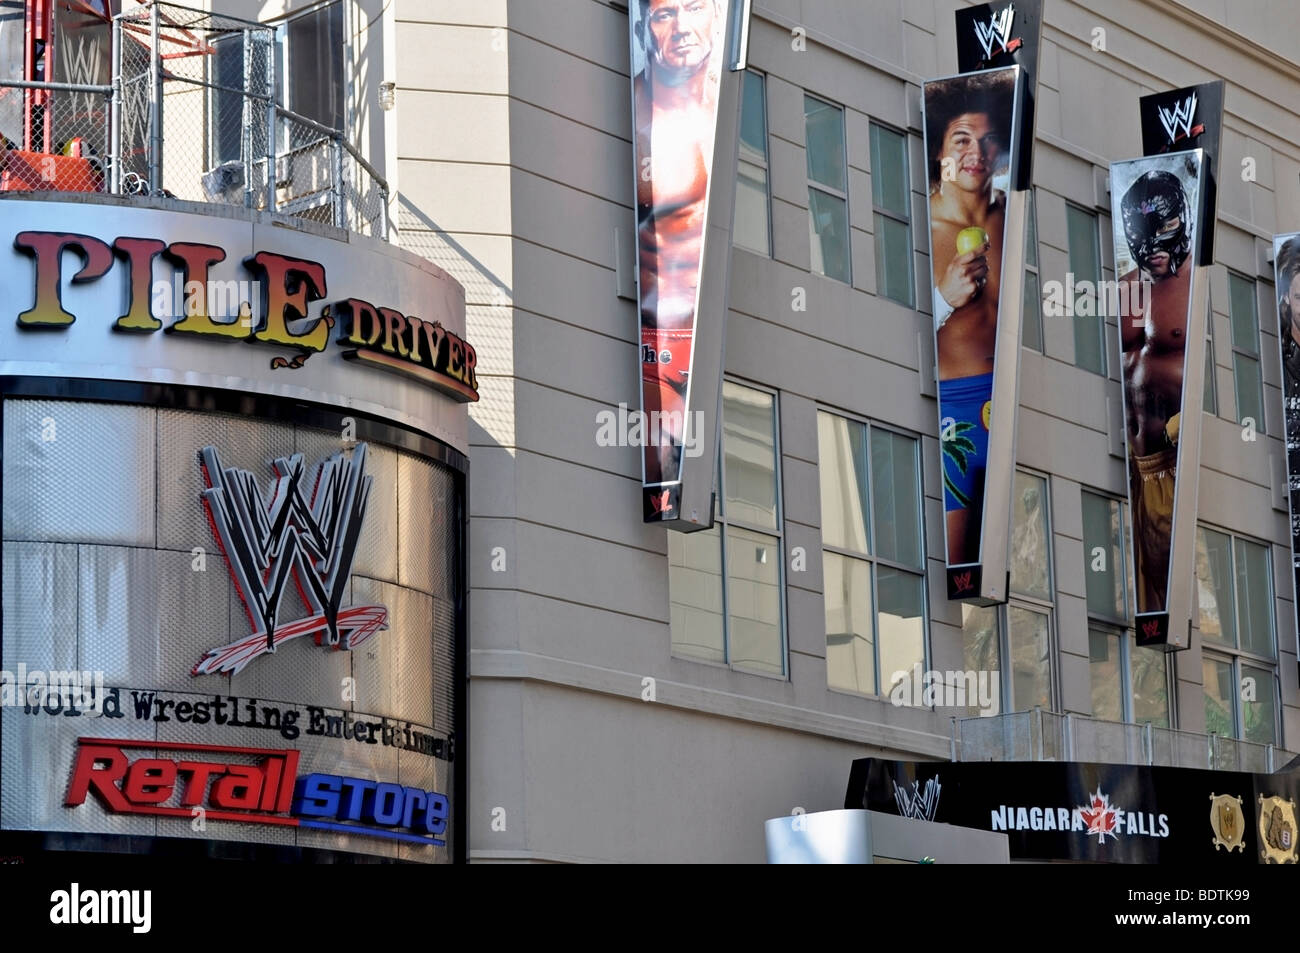 WWE (World Wrestling Entertainement) - Attractions on Clifton Hill, Niagara, Canada Stock Photo